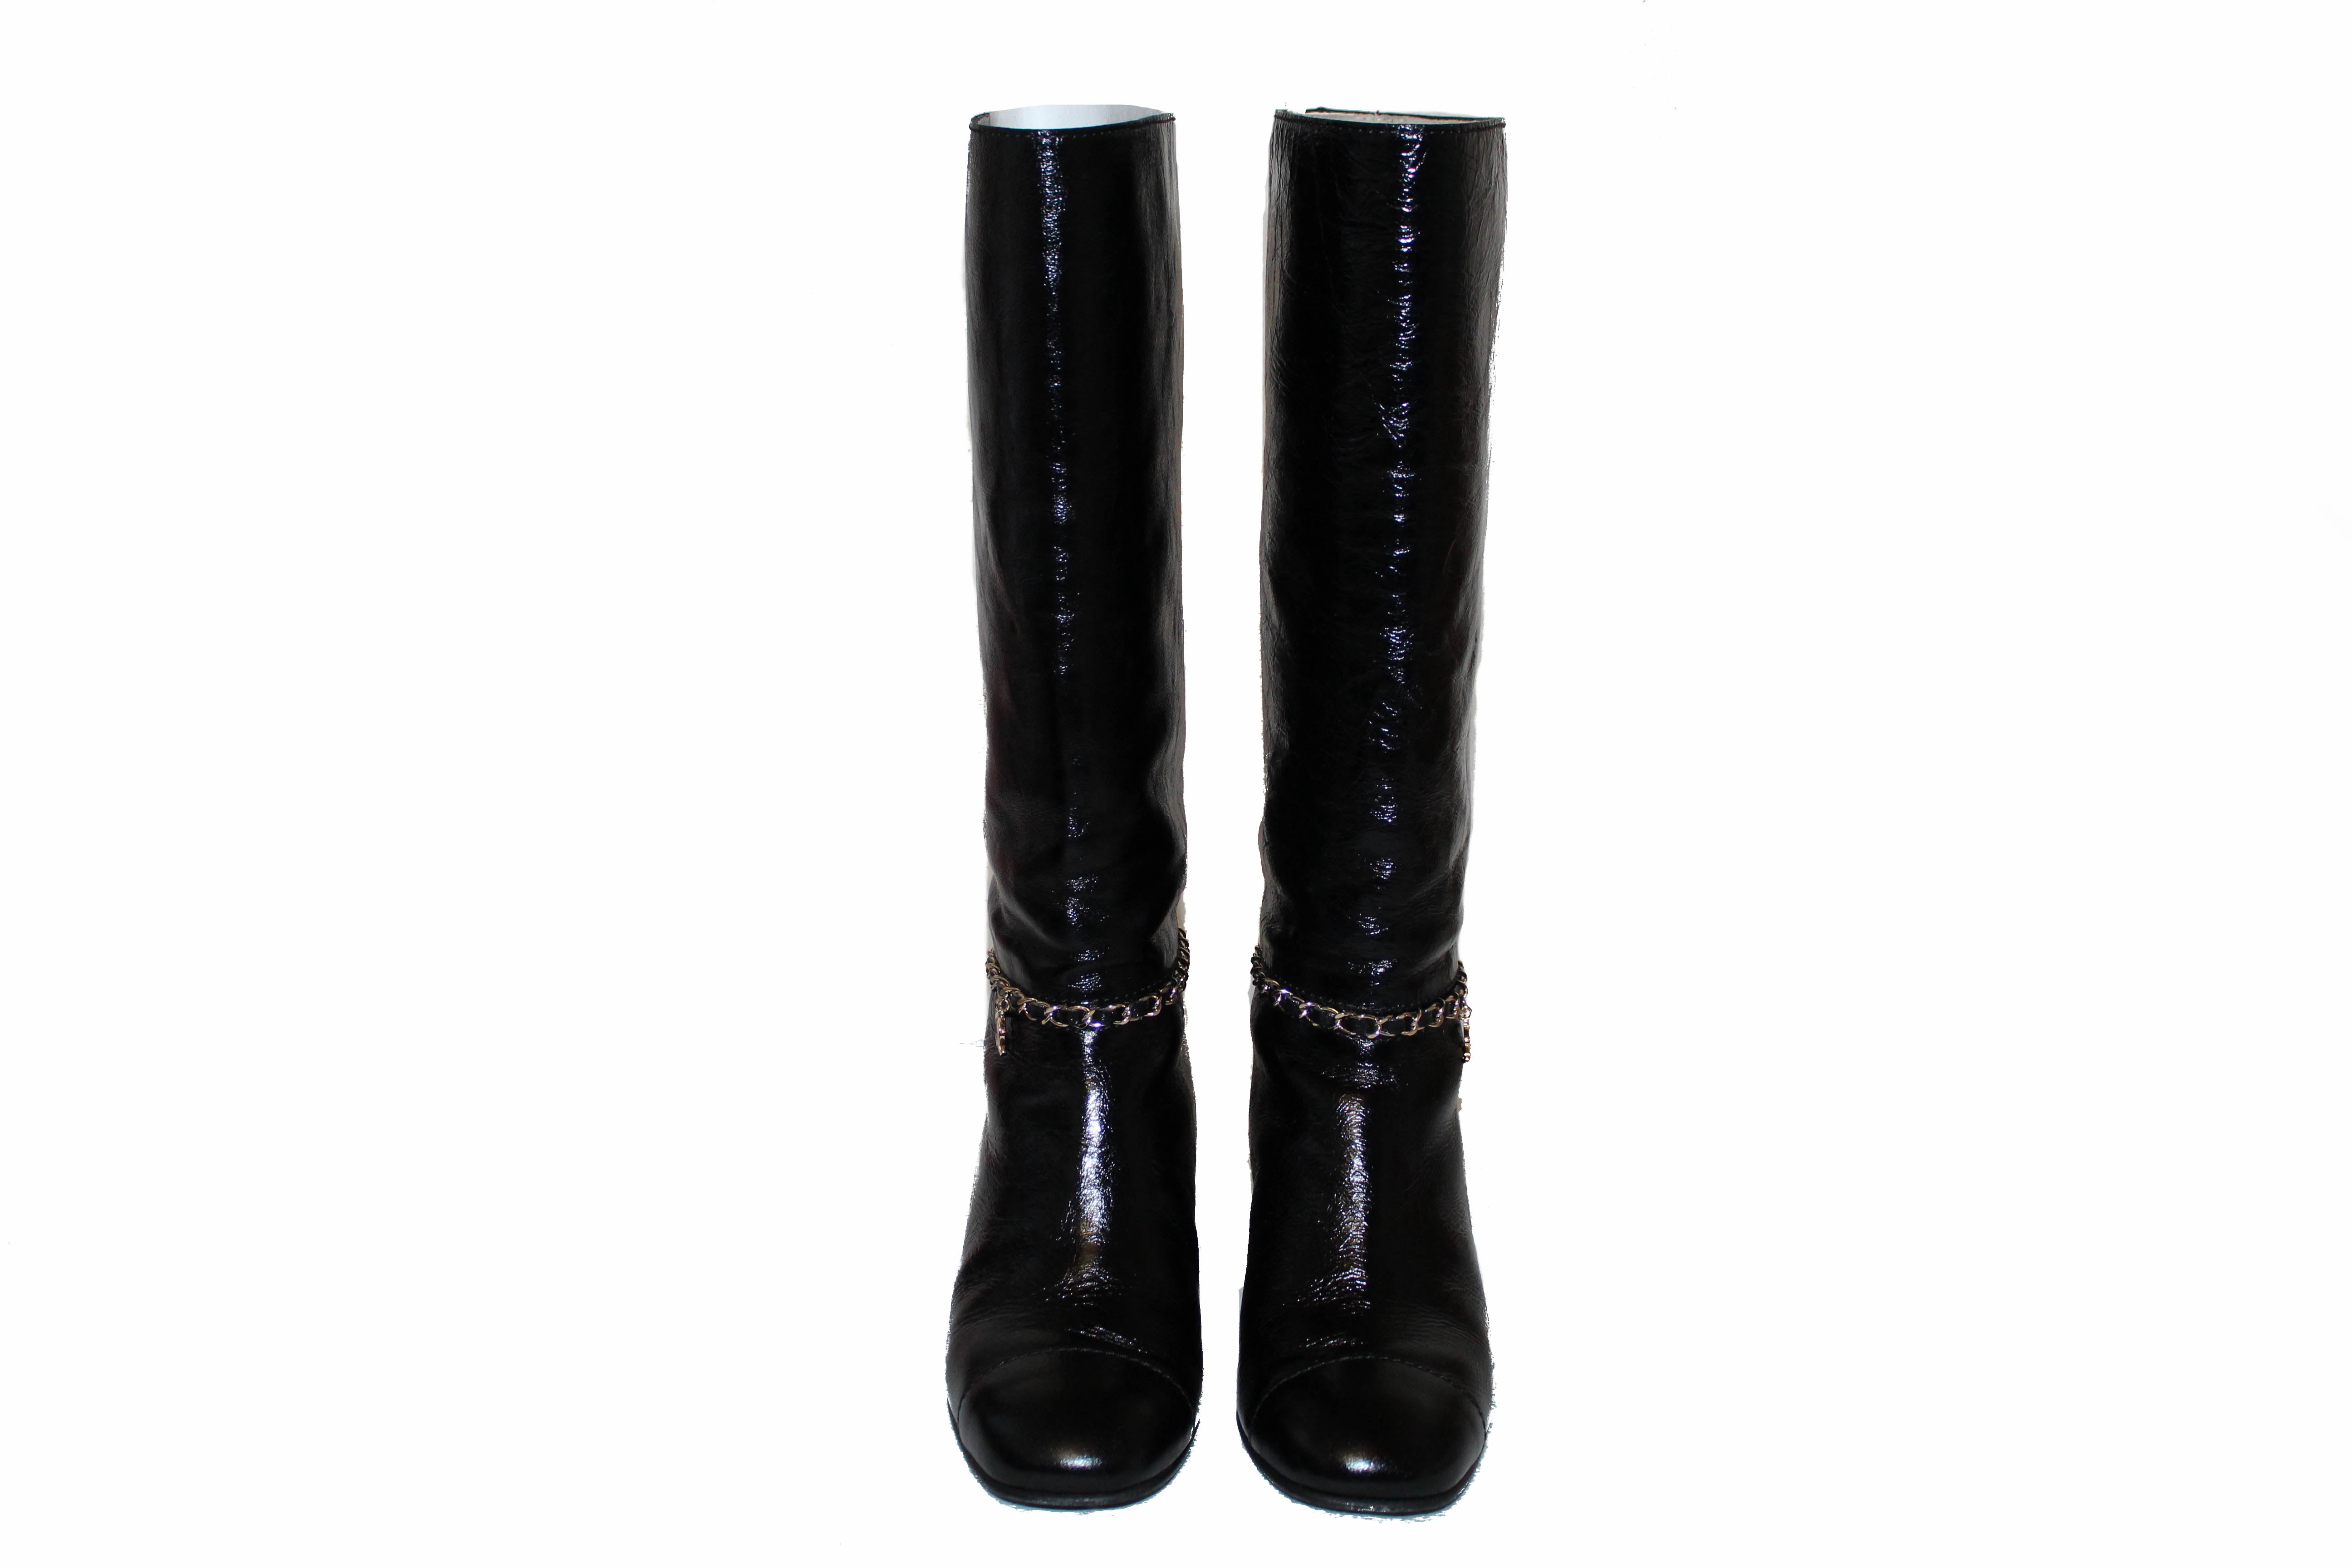 Chanel Black Patent Leather Boots – Vintage by Misty